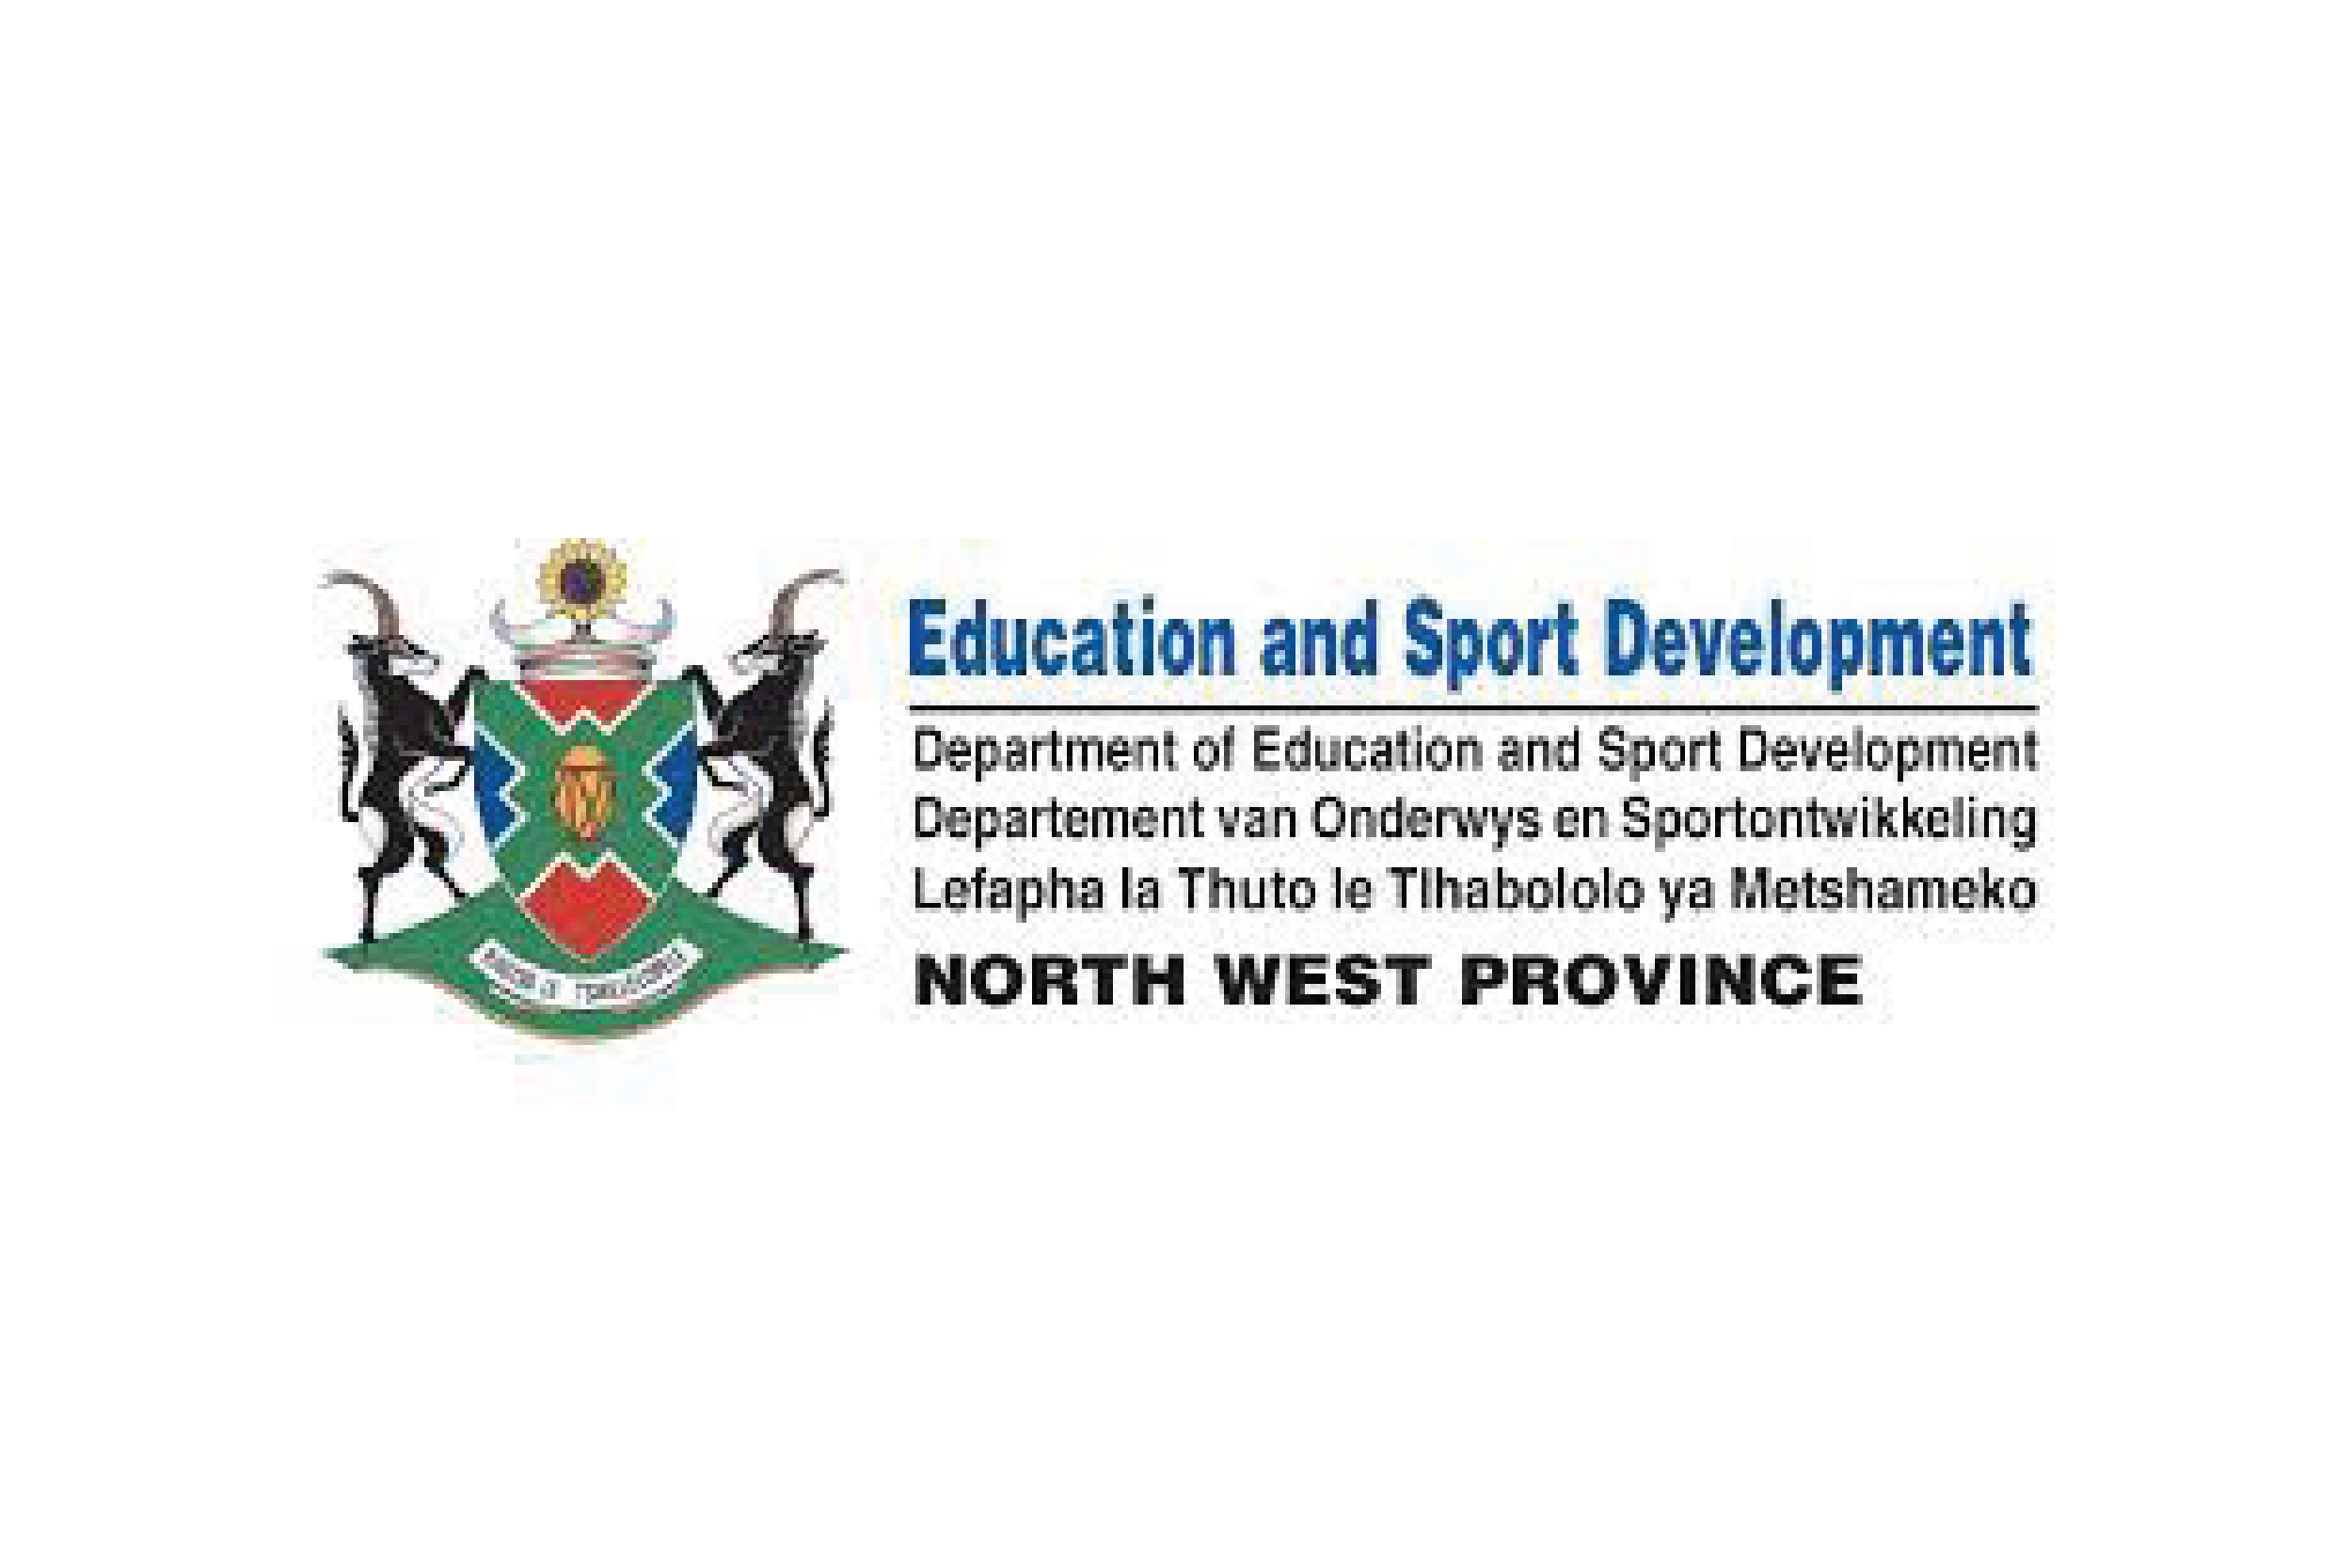 Department of Education and Sports Development North West Province